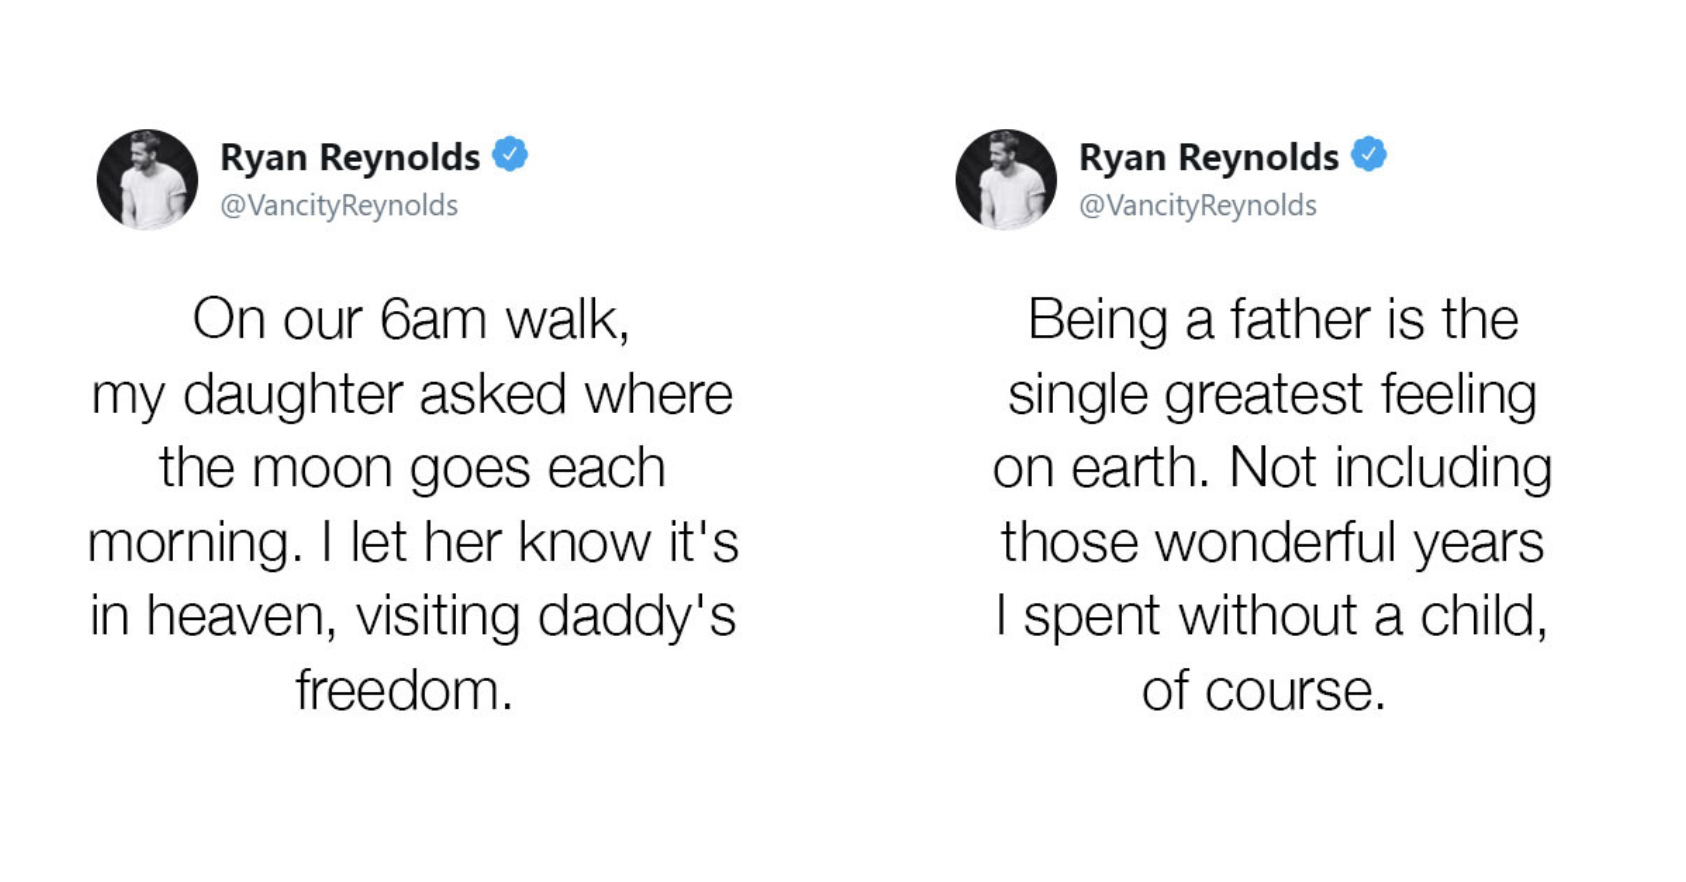 A couple of Ryan Reynolds-s trademark witty and engaging social media posts, showcasing his humorous charm and personality